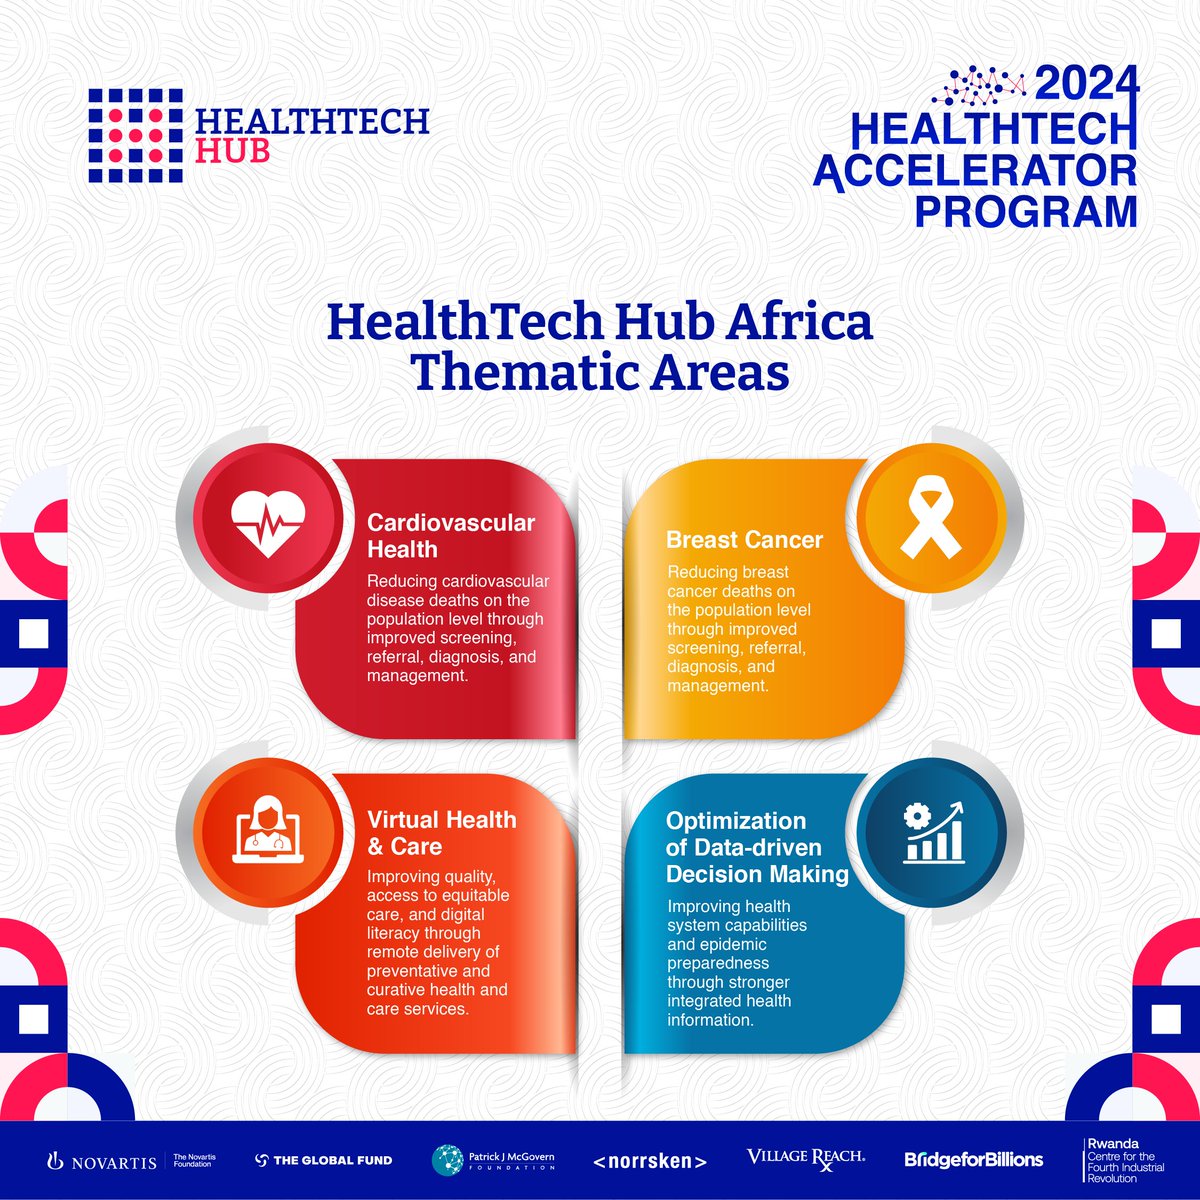 The Health Tech Hub Africa Accelerator Program is the right place to grow and take your venture to the next level, especially if it aligns with the thematic areas highlighted below. For more information and to apply: thehealthtech.org #HTHA2024 #AfricanStartups #Ventures